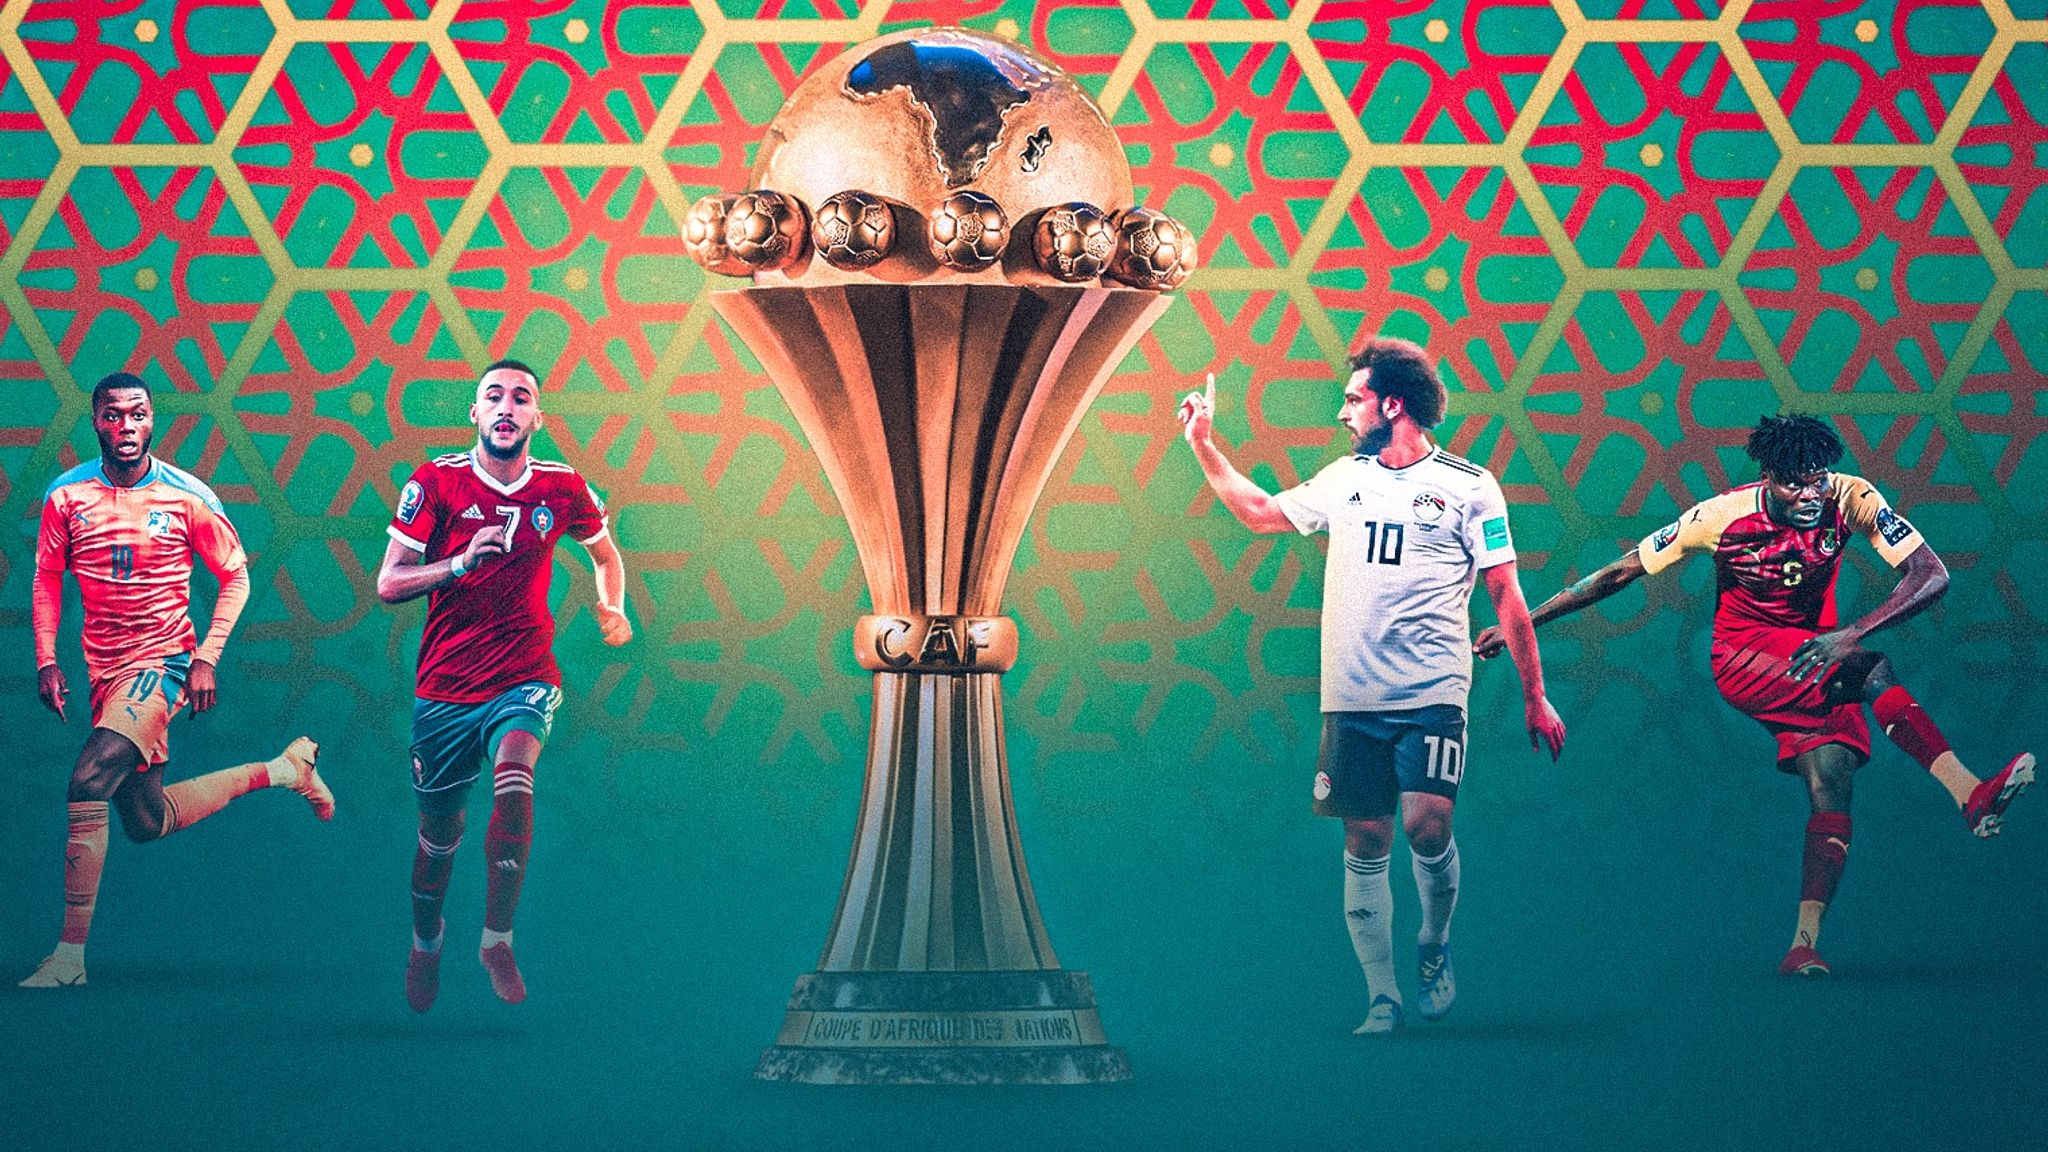 AFCON 2021: Quarter-final matches confirmed [Full list] – New National Star